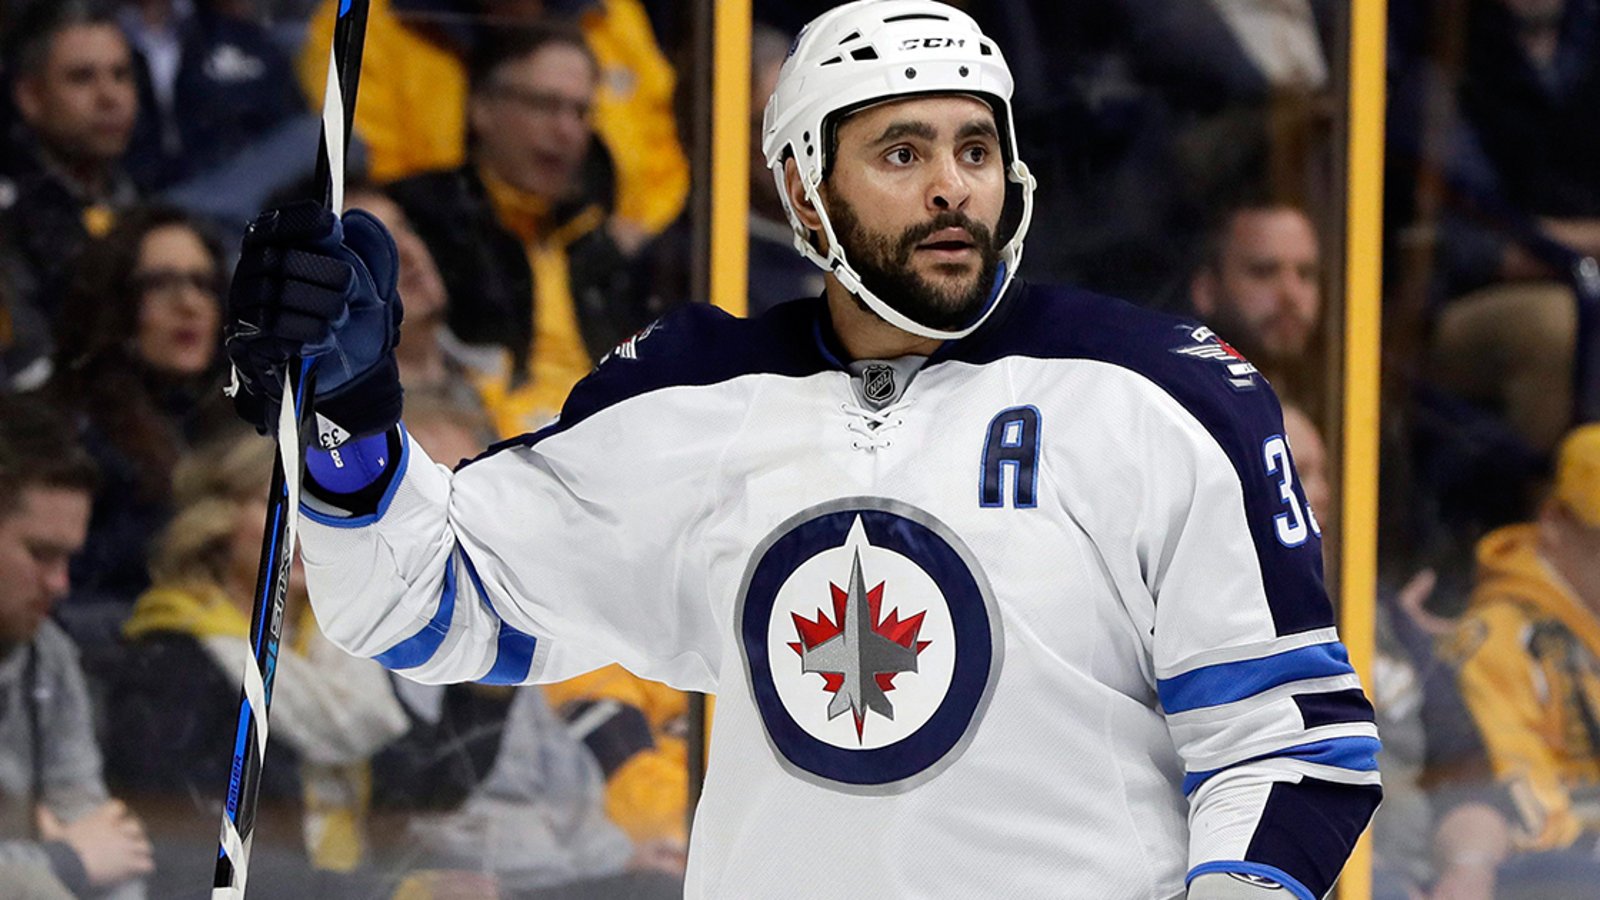 Byfuglien excited to play in new NHL home – Winnipeg Free Press